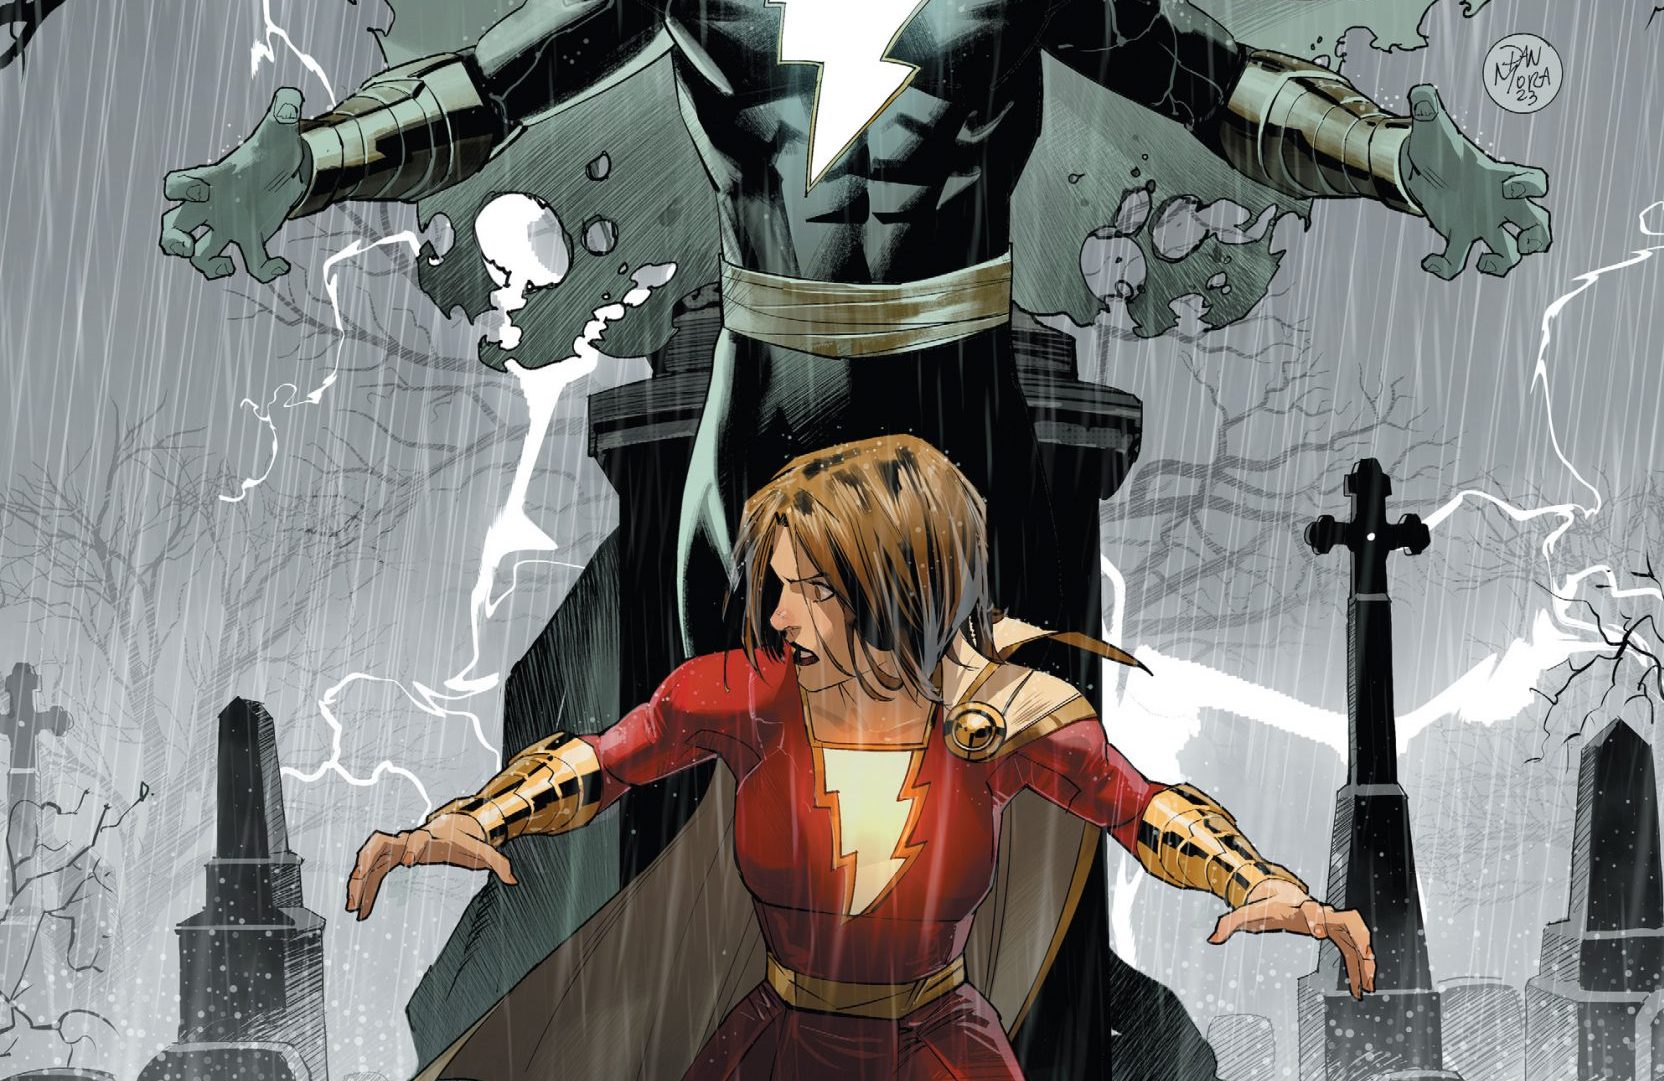 'Knight Terrors: Shazam!' #1 is an eldest sibling’s worst nightmare